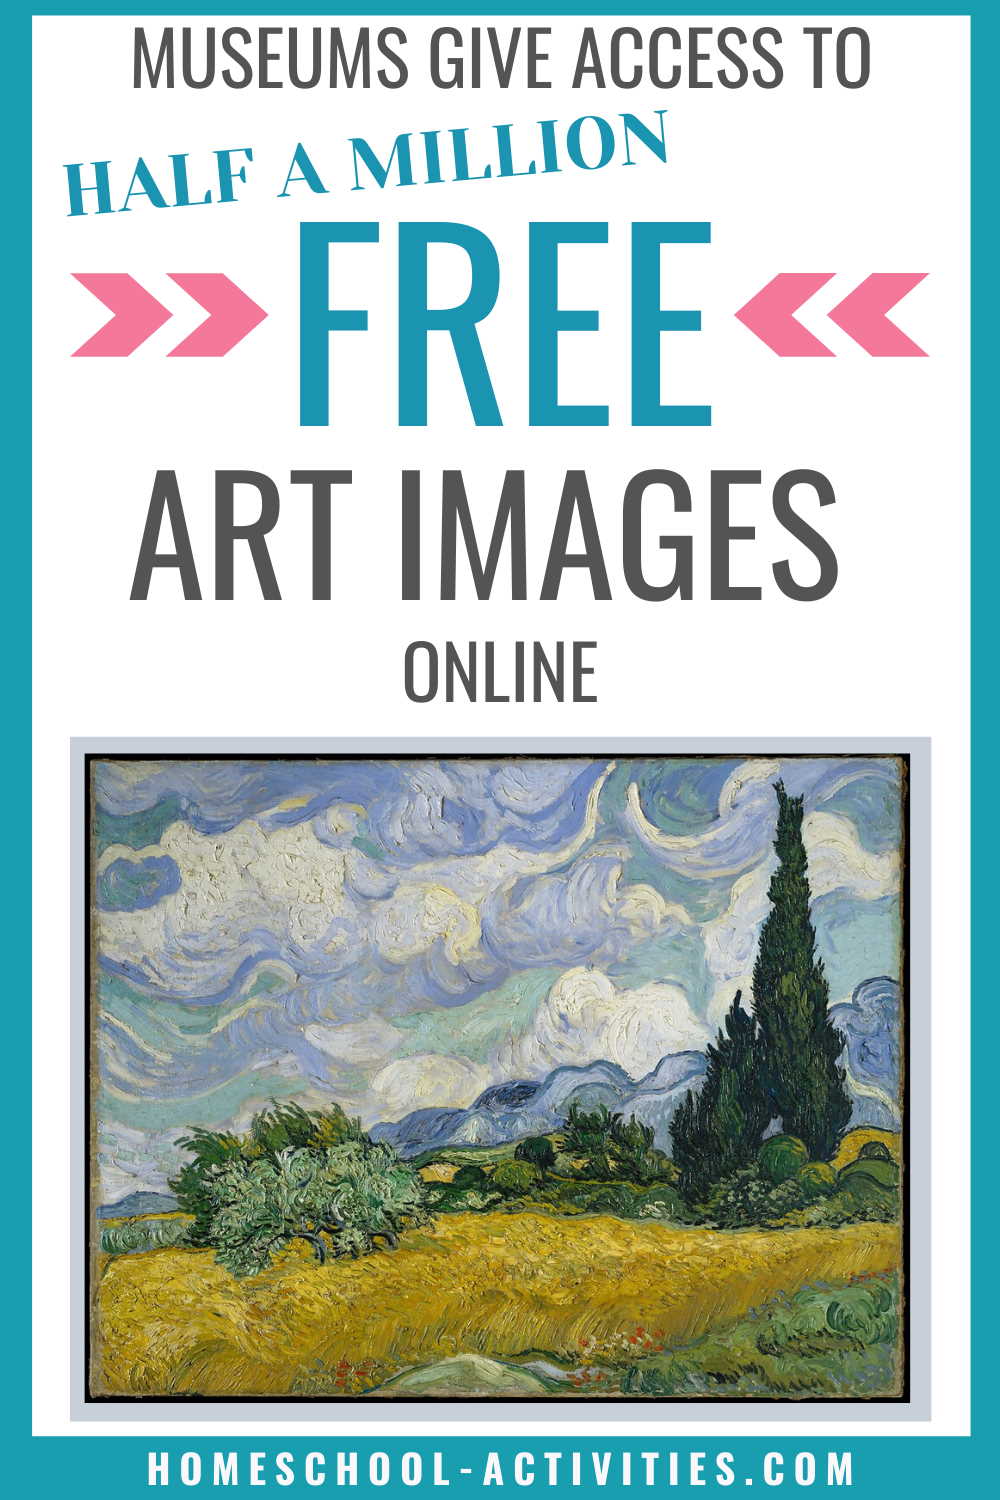 Half a million free famous art images from museums across the world.